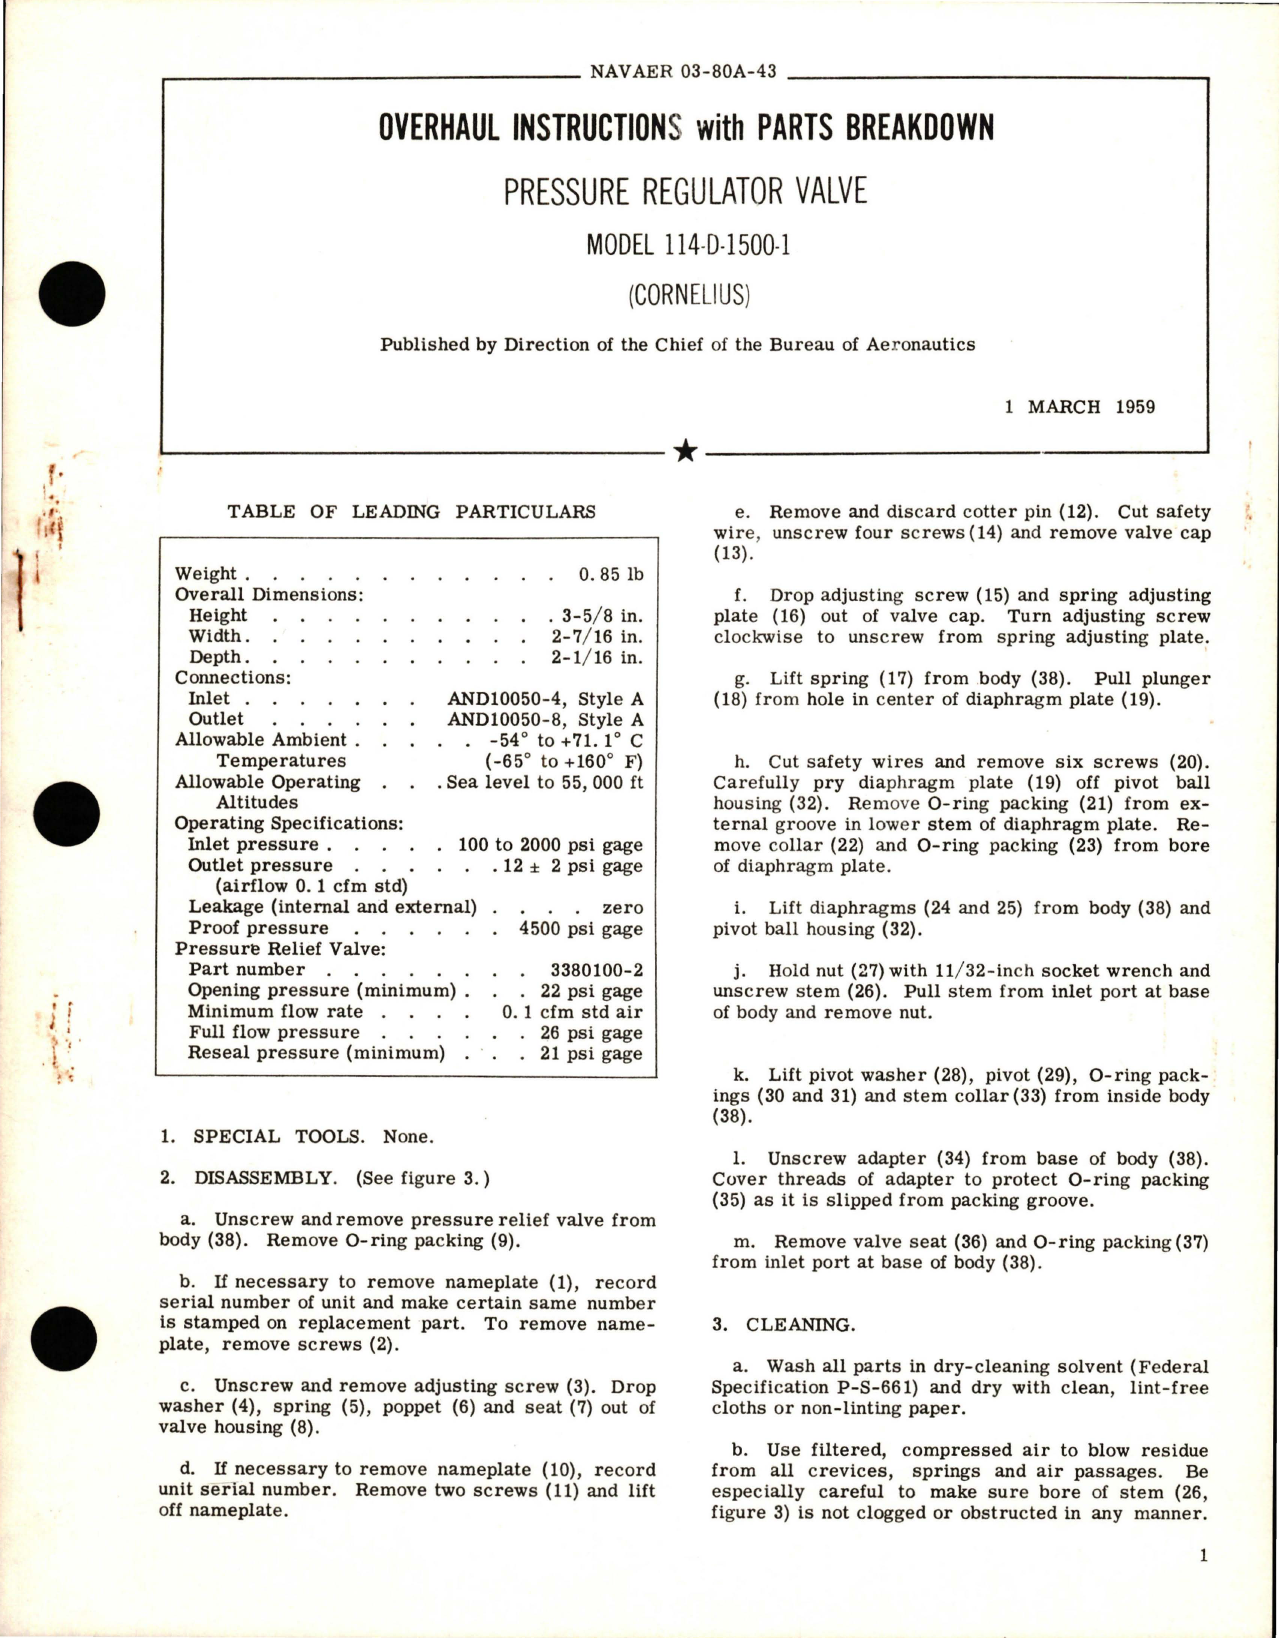 Sample page 1 from AirCorps Library document: Overhaul Instructions with Parts Breakdown for Pressure Regulator Valve - Model 114-D-1500-1 